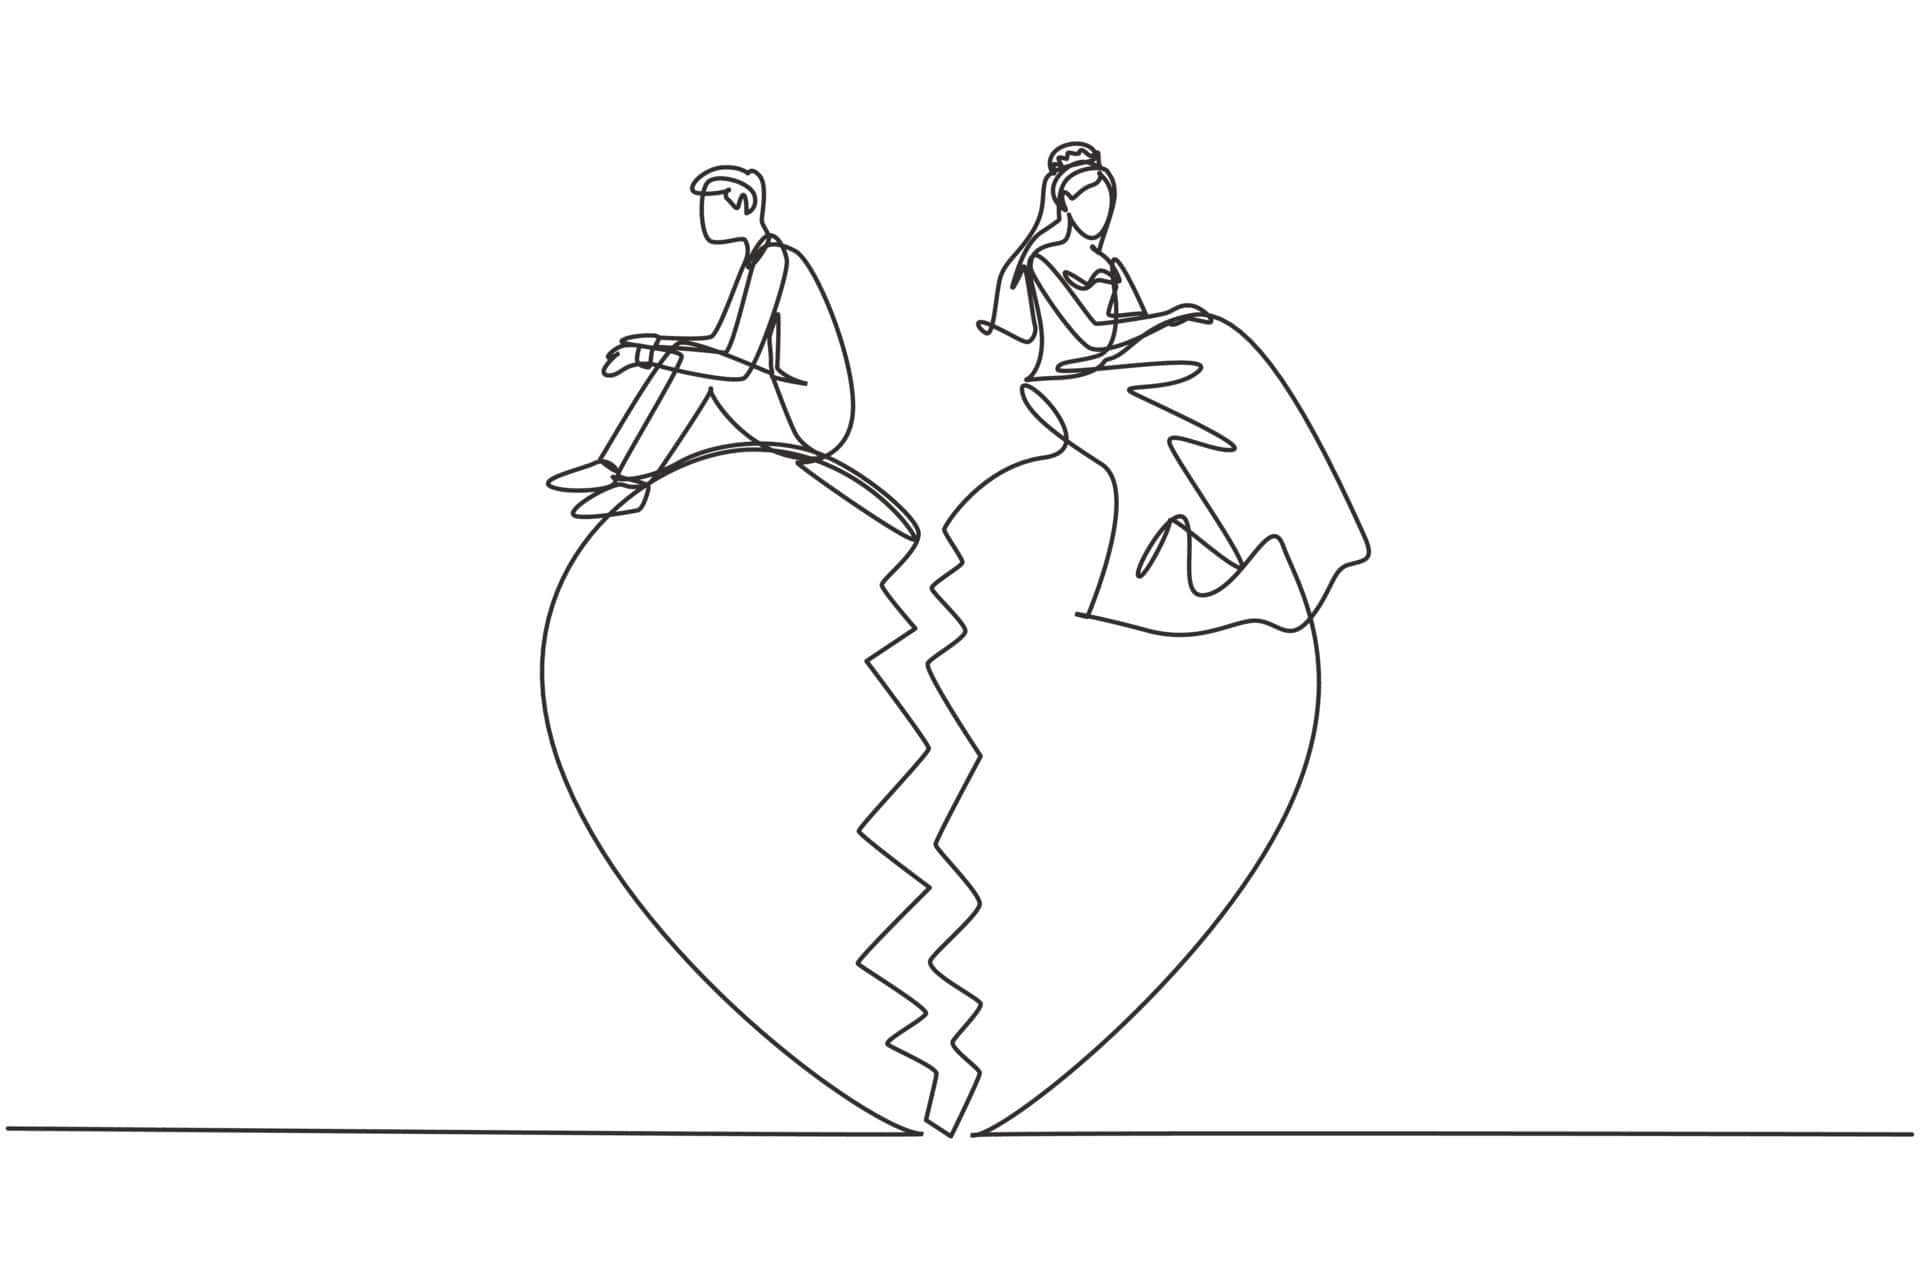 A Continuous Line Drawing Of A Couple Sitting On A Broken Heart